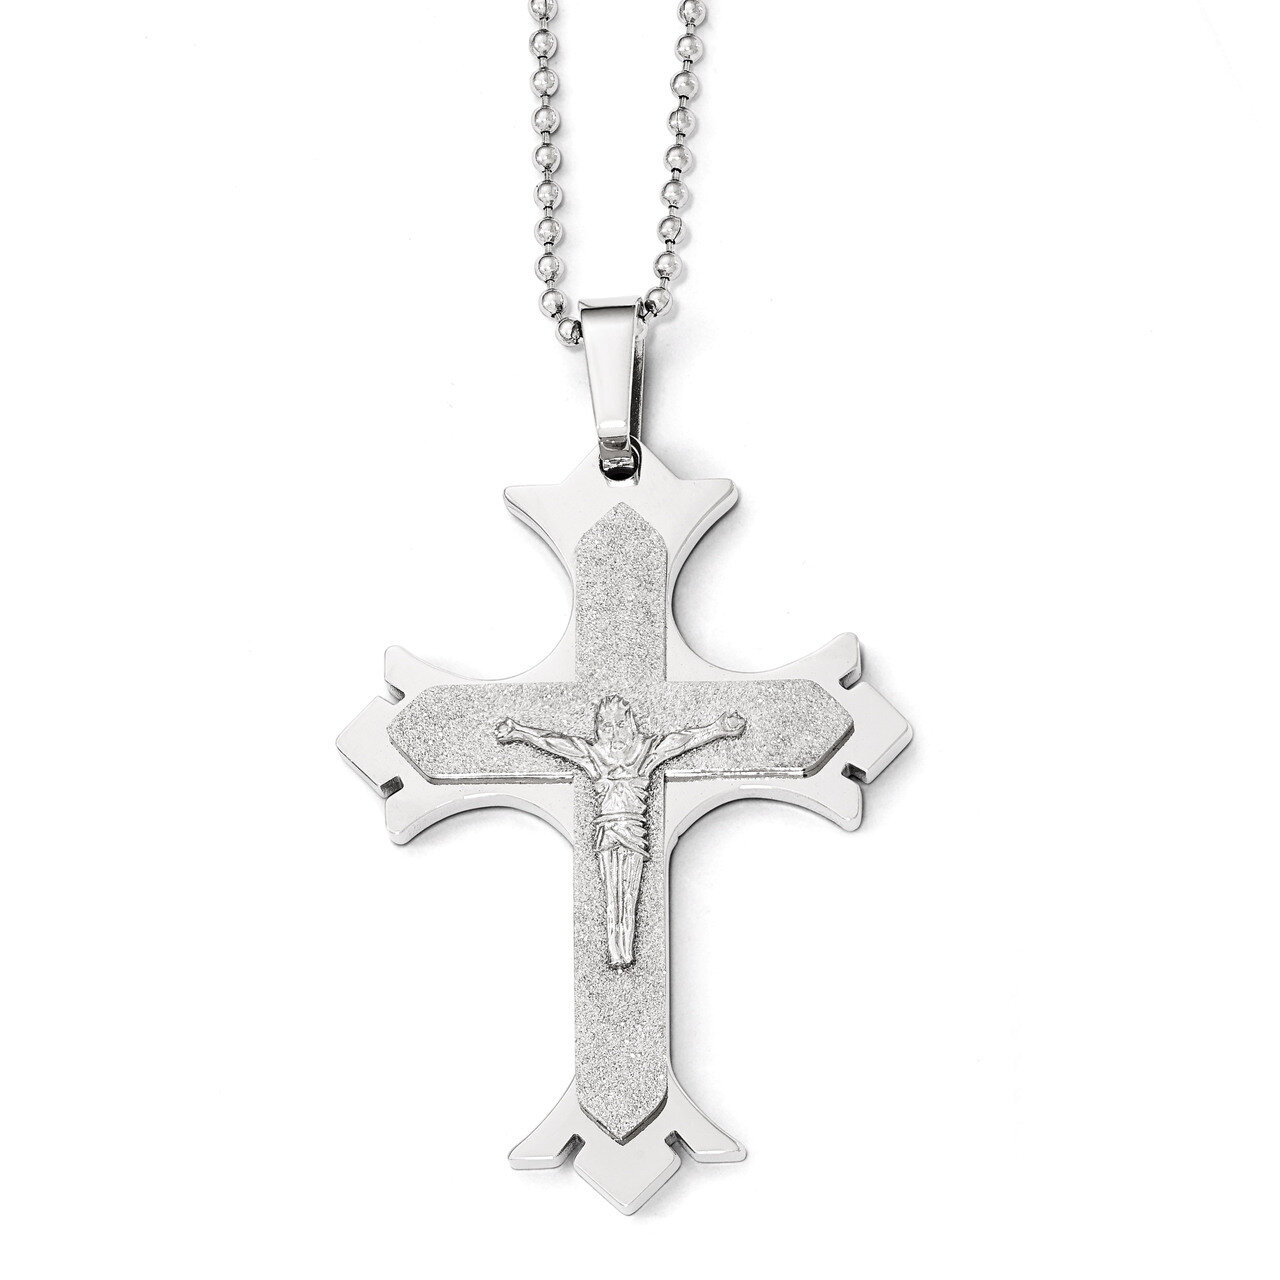 Polished Laser Cut Crucifix Necklace - Stainless Steel SRN1839-22